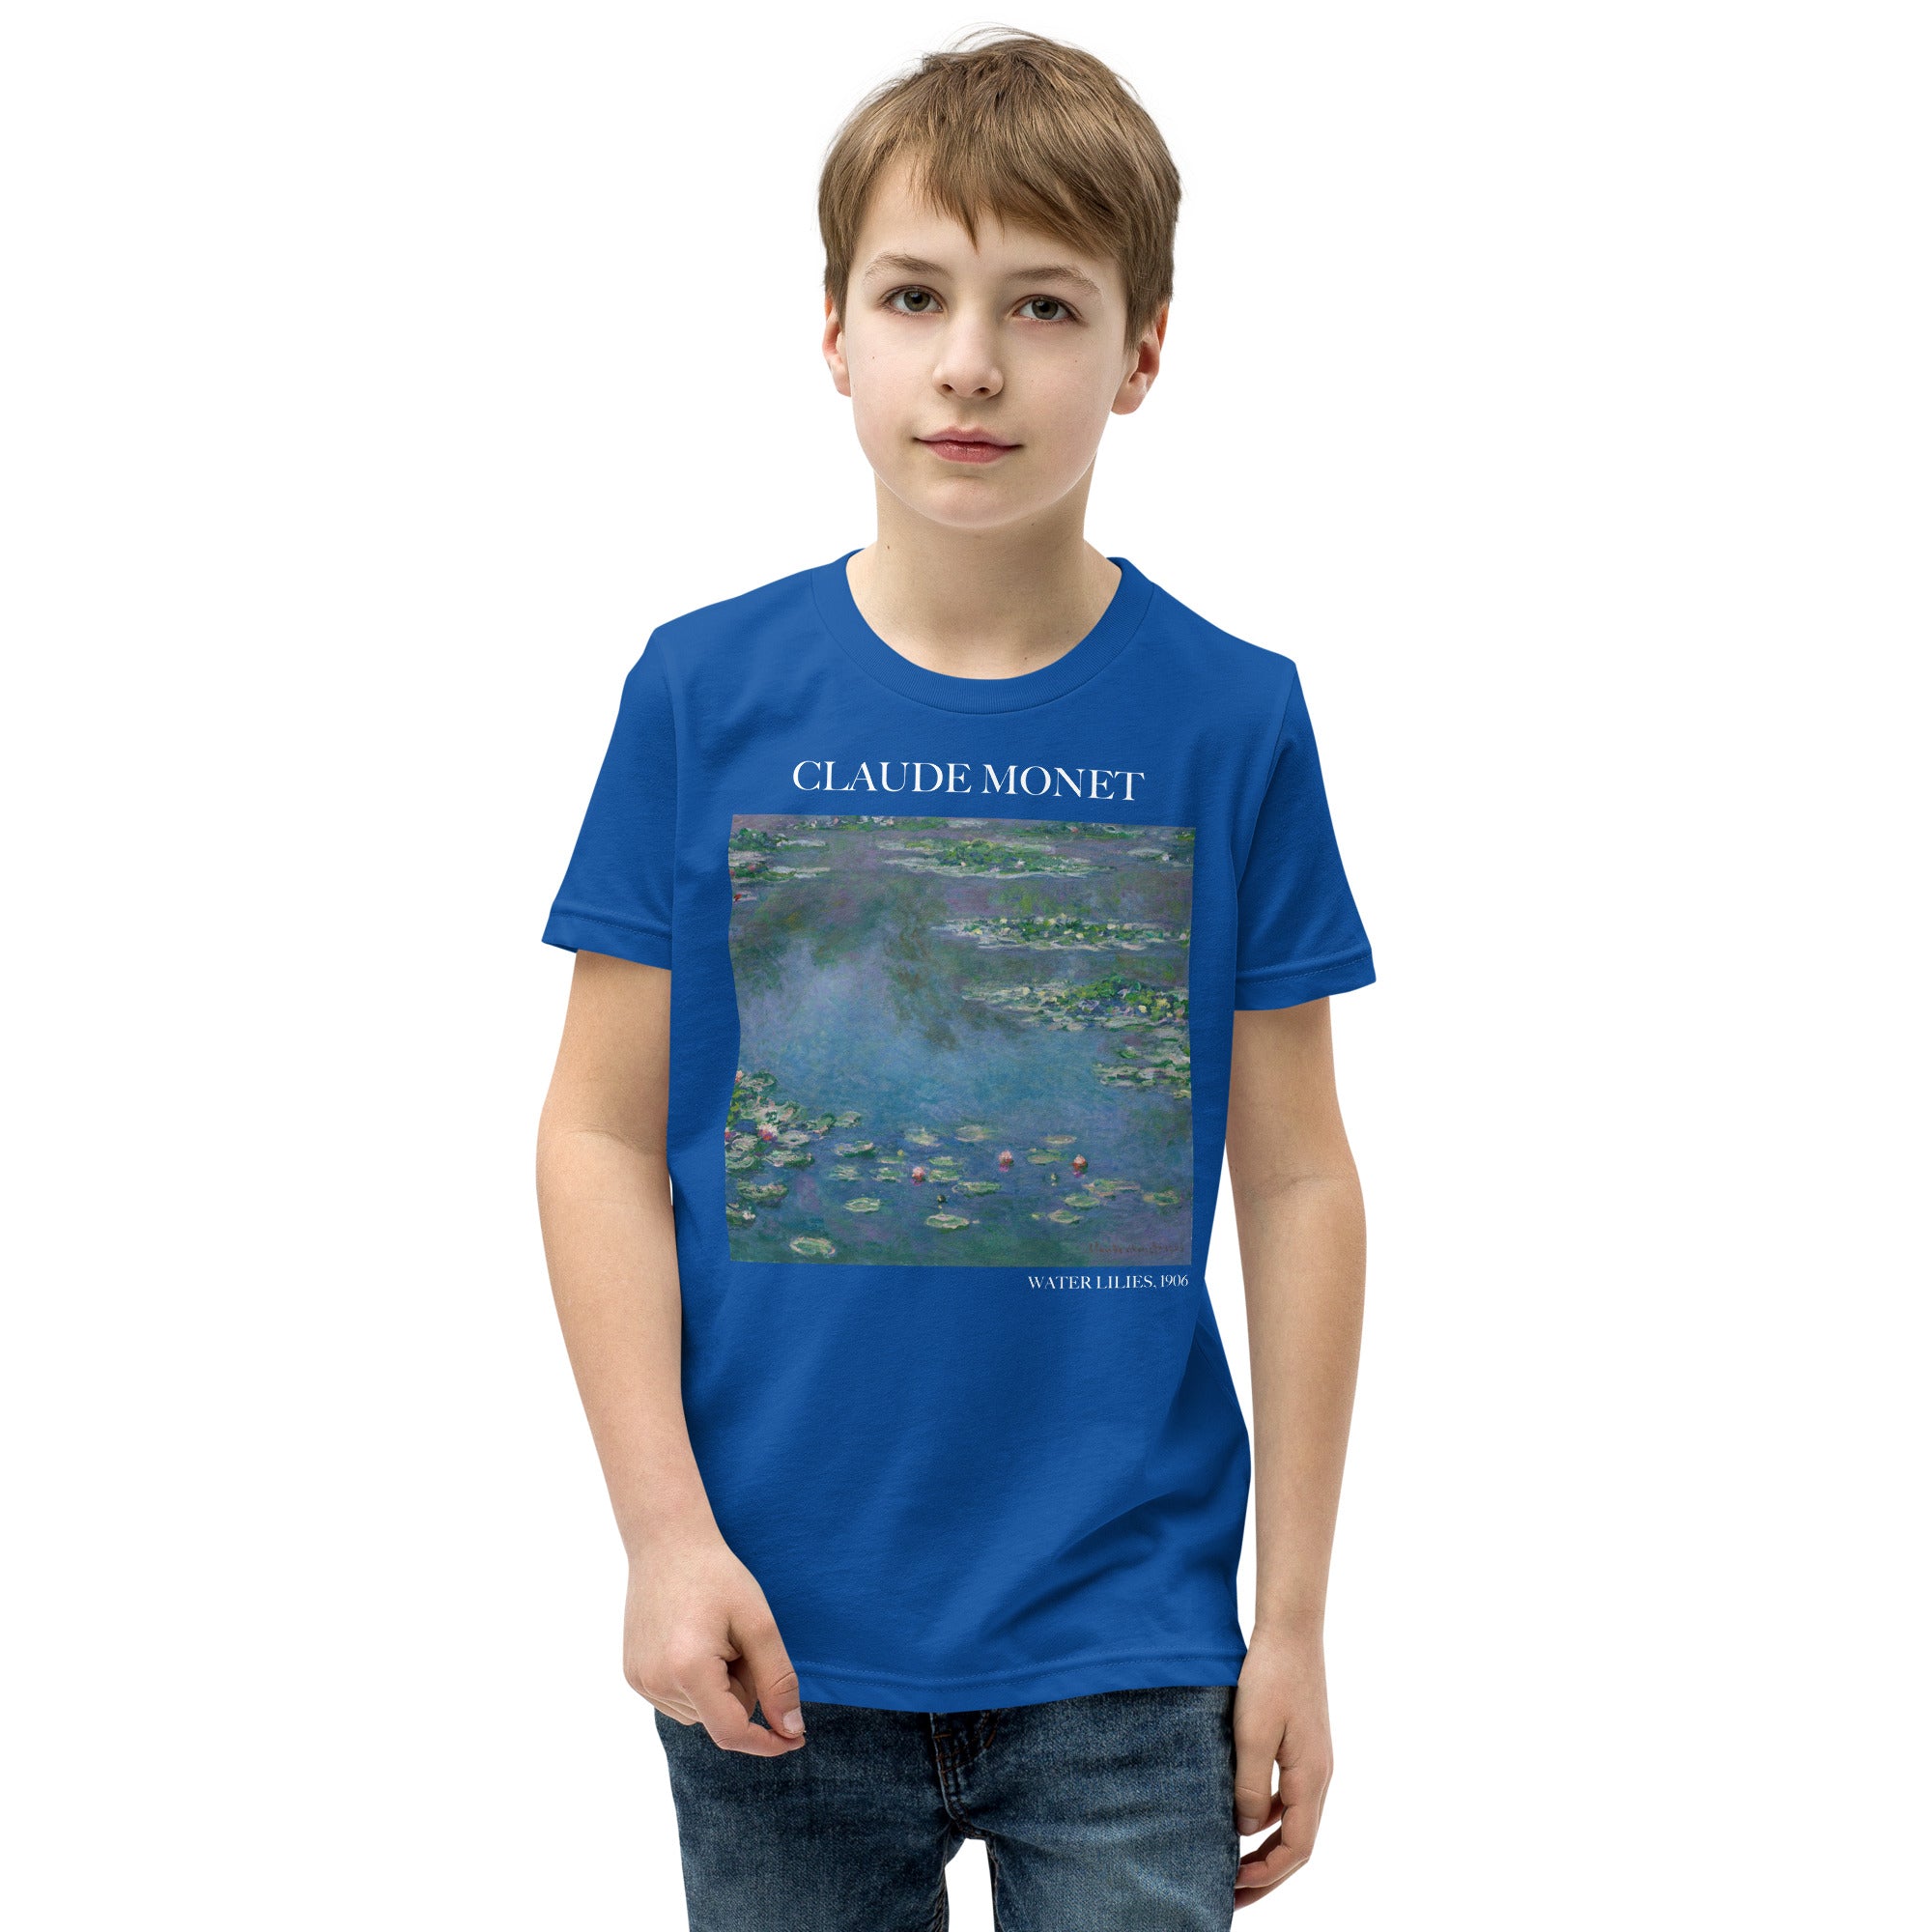 Claude Monet 'Water Lilies' Famous Painting Short Sleeve T-Shirt | Premium Youth Art Tee